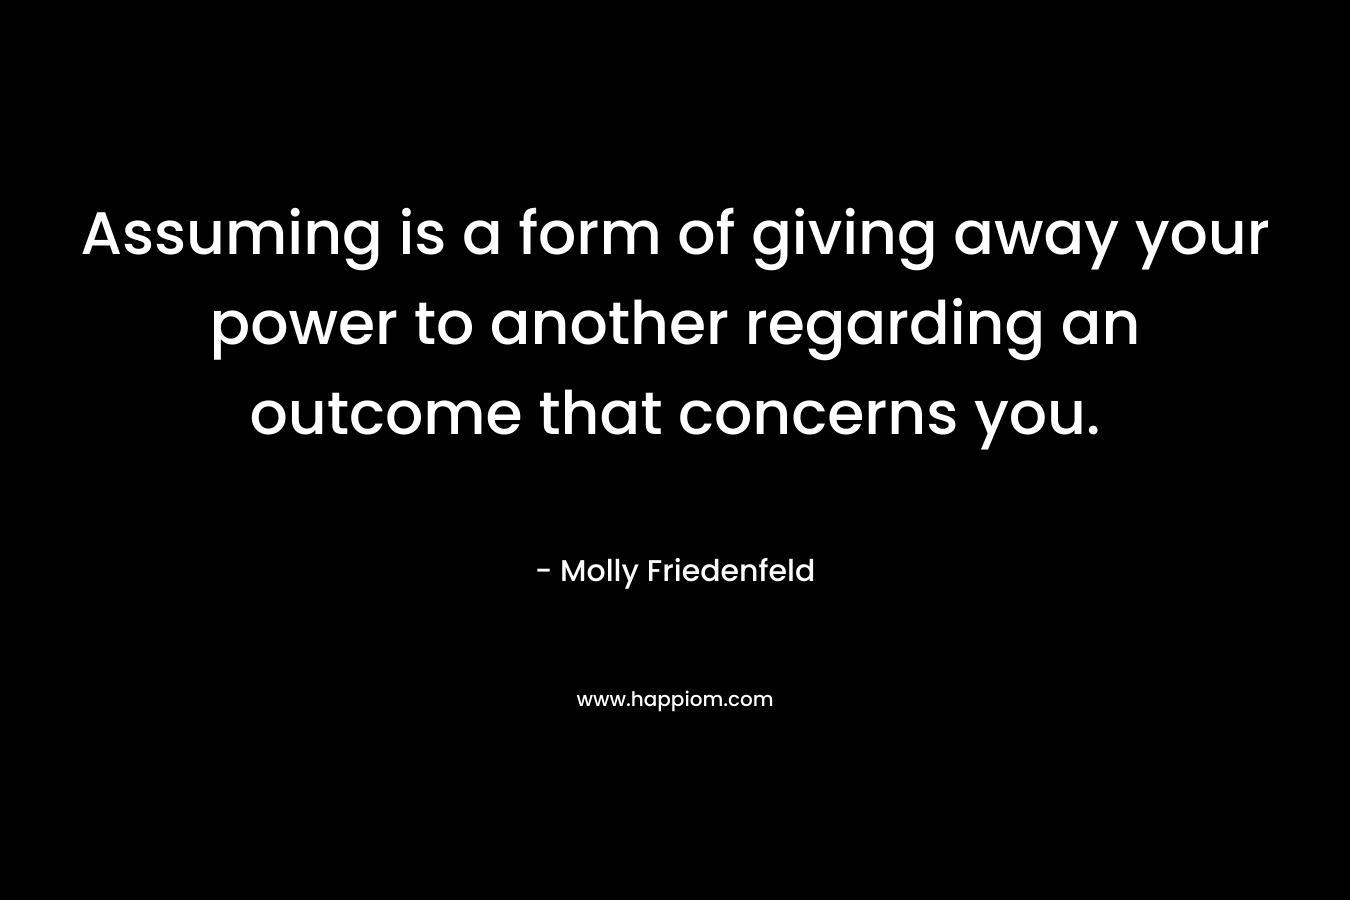 Assuming is a form of giving away your power to another regarding an outcome that concerns you. – Molly Friedenfeld